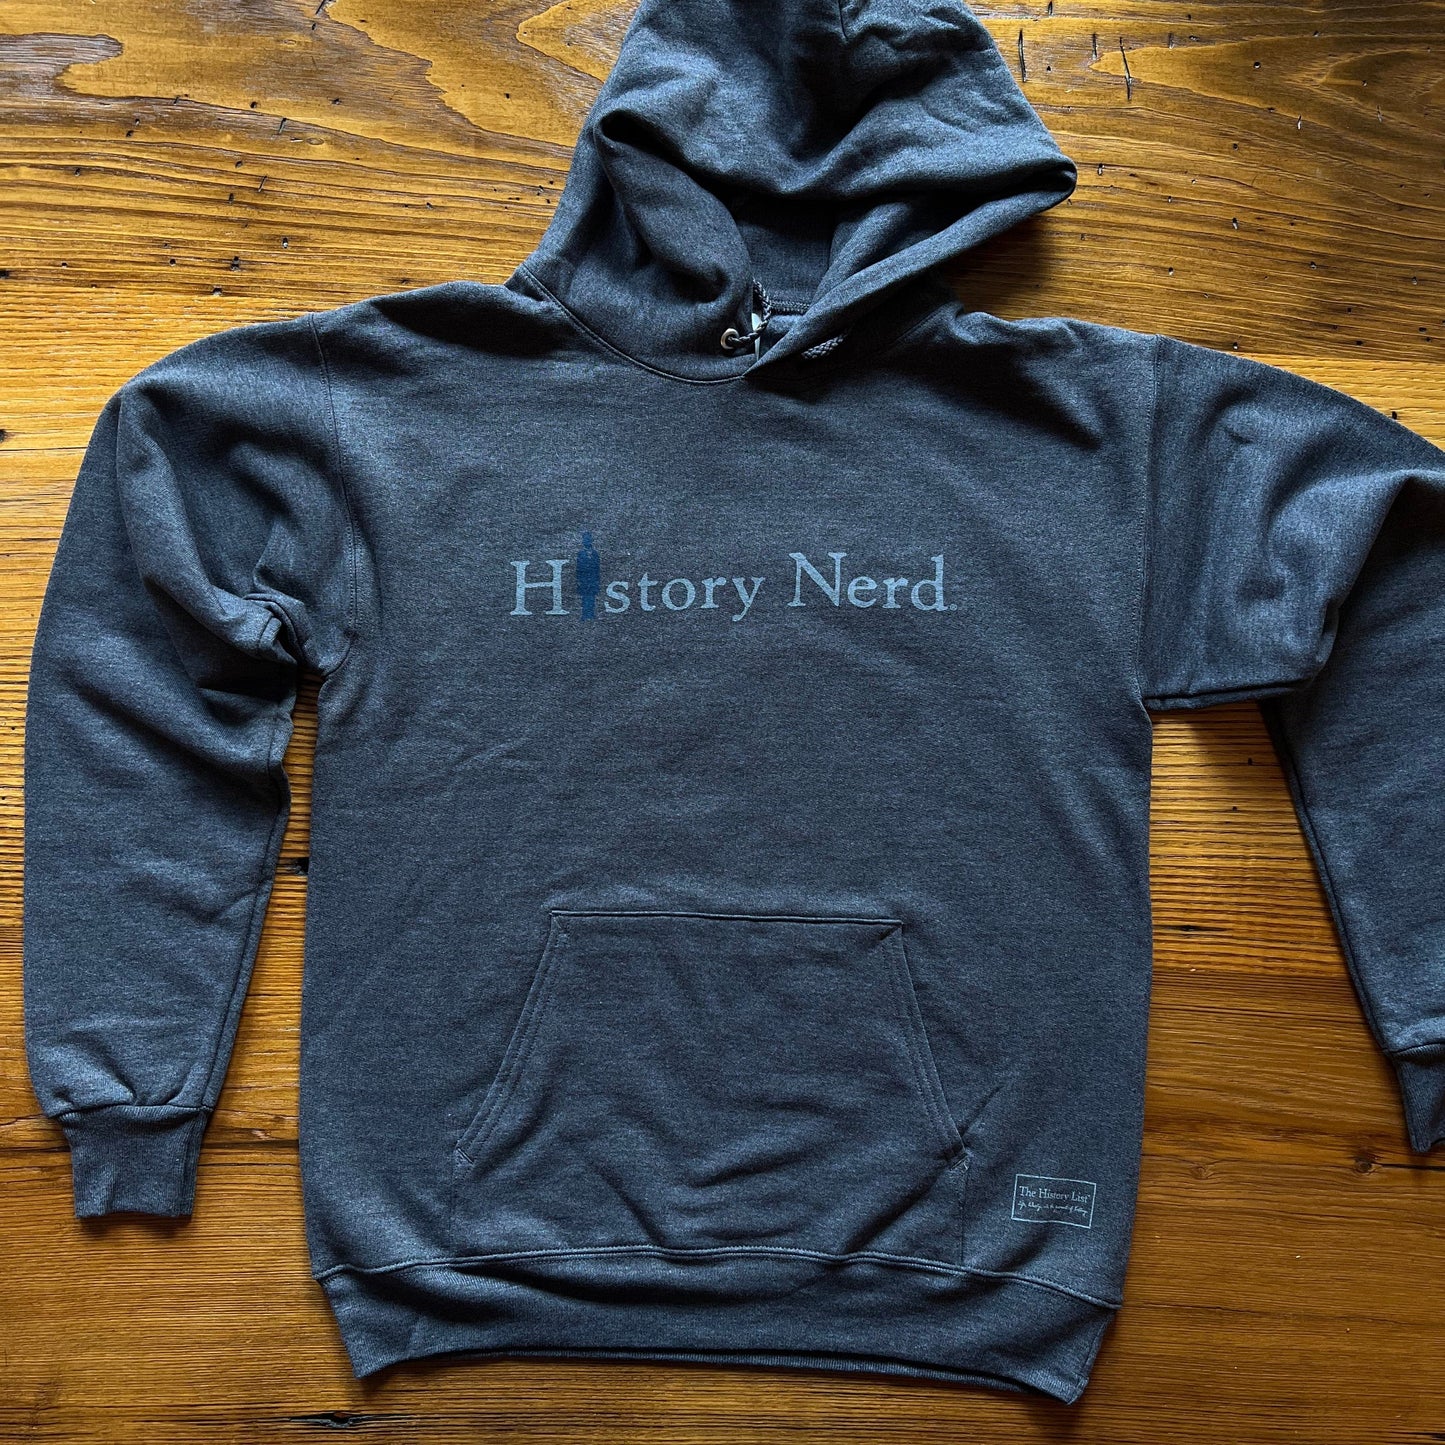 "History Nerd" with Abraham Lincoln - Hooded sweatshirt in Charcoal heather from The History List store